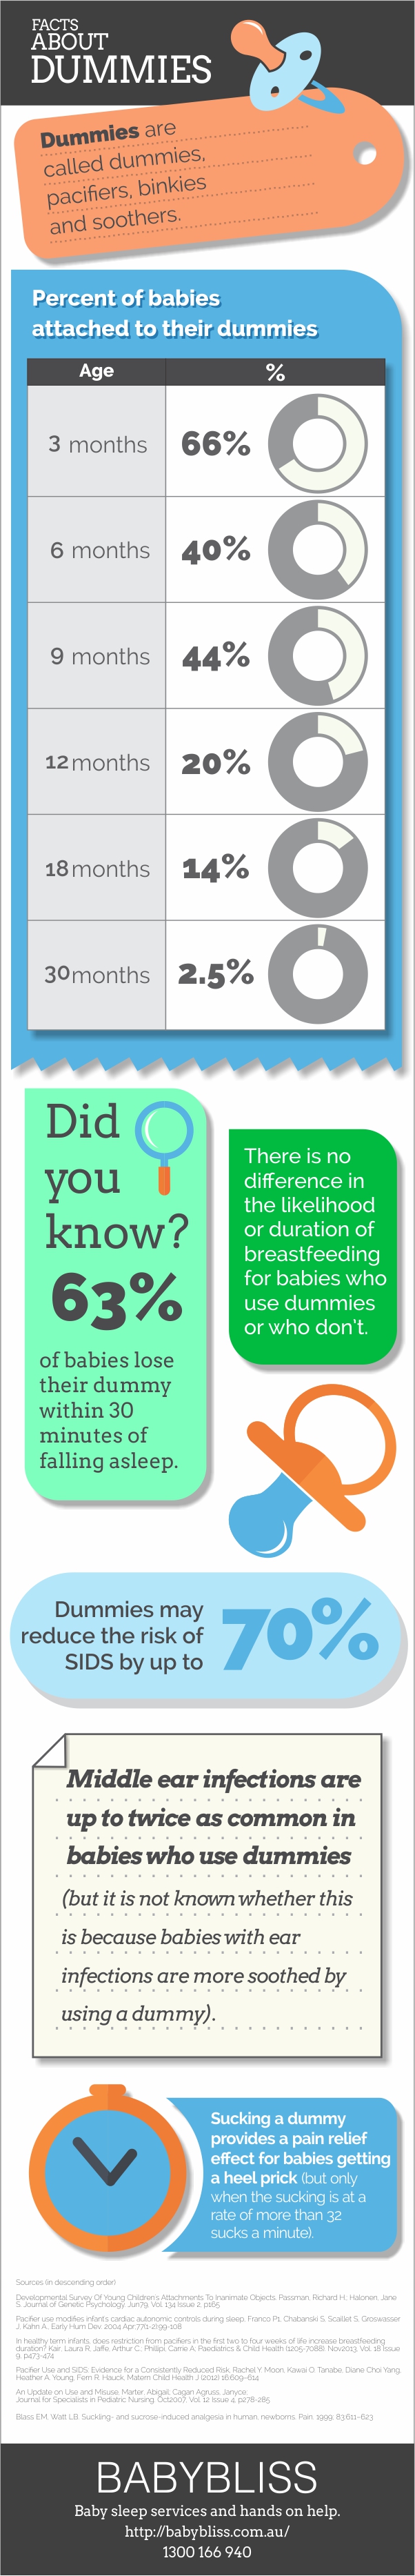 Infographic: facts about using dummies for unsettled baby